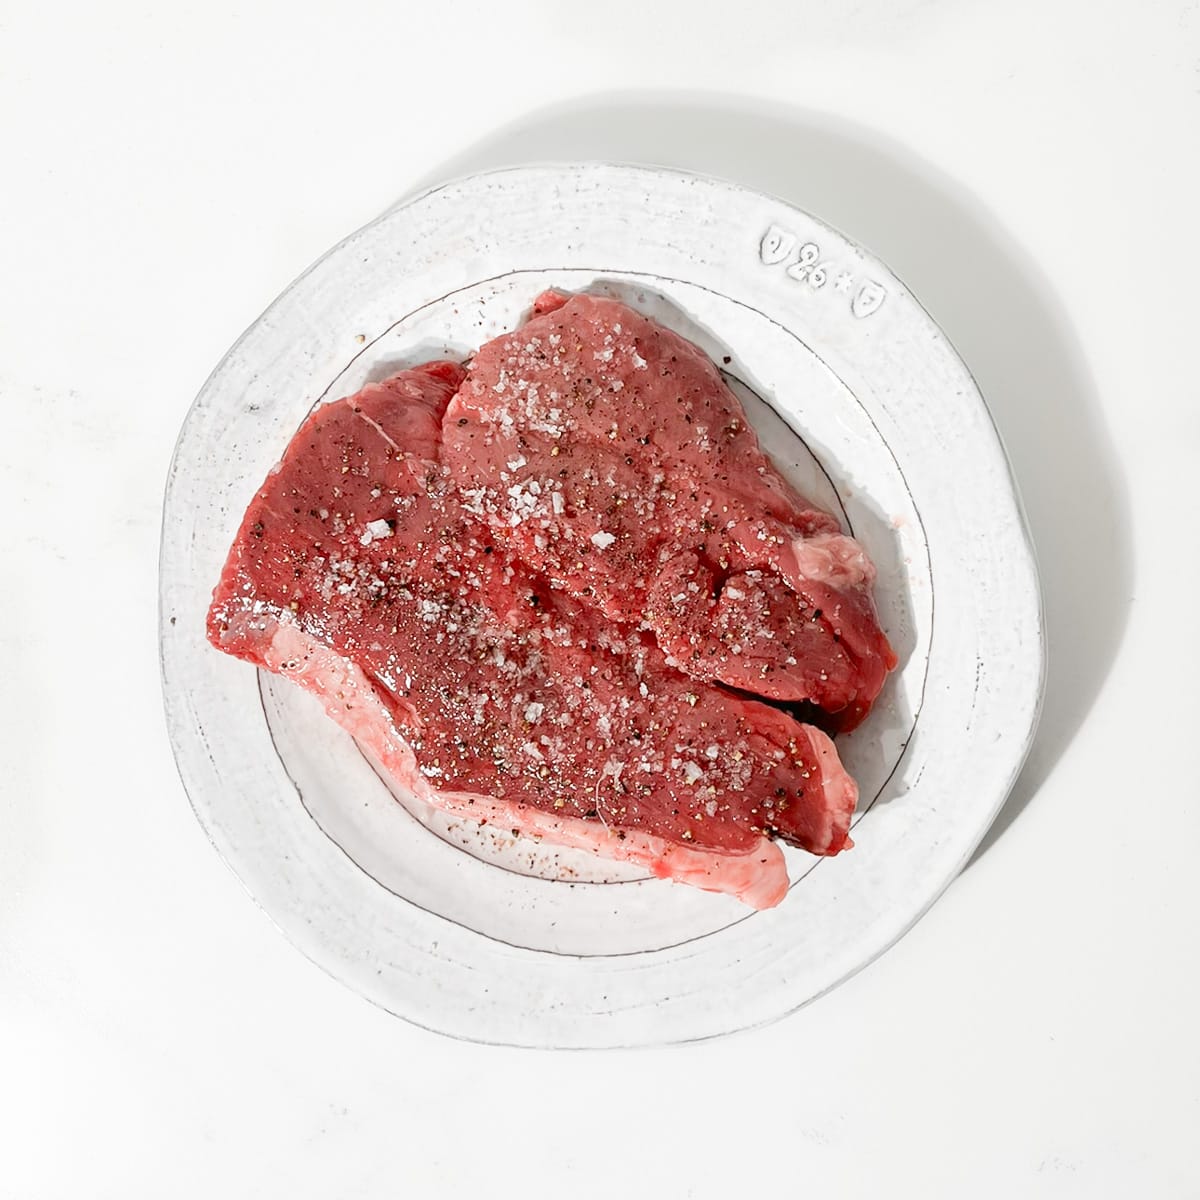 Raw steak on a plate that's been seasoned with salt and pepper. 